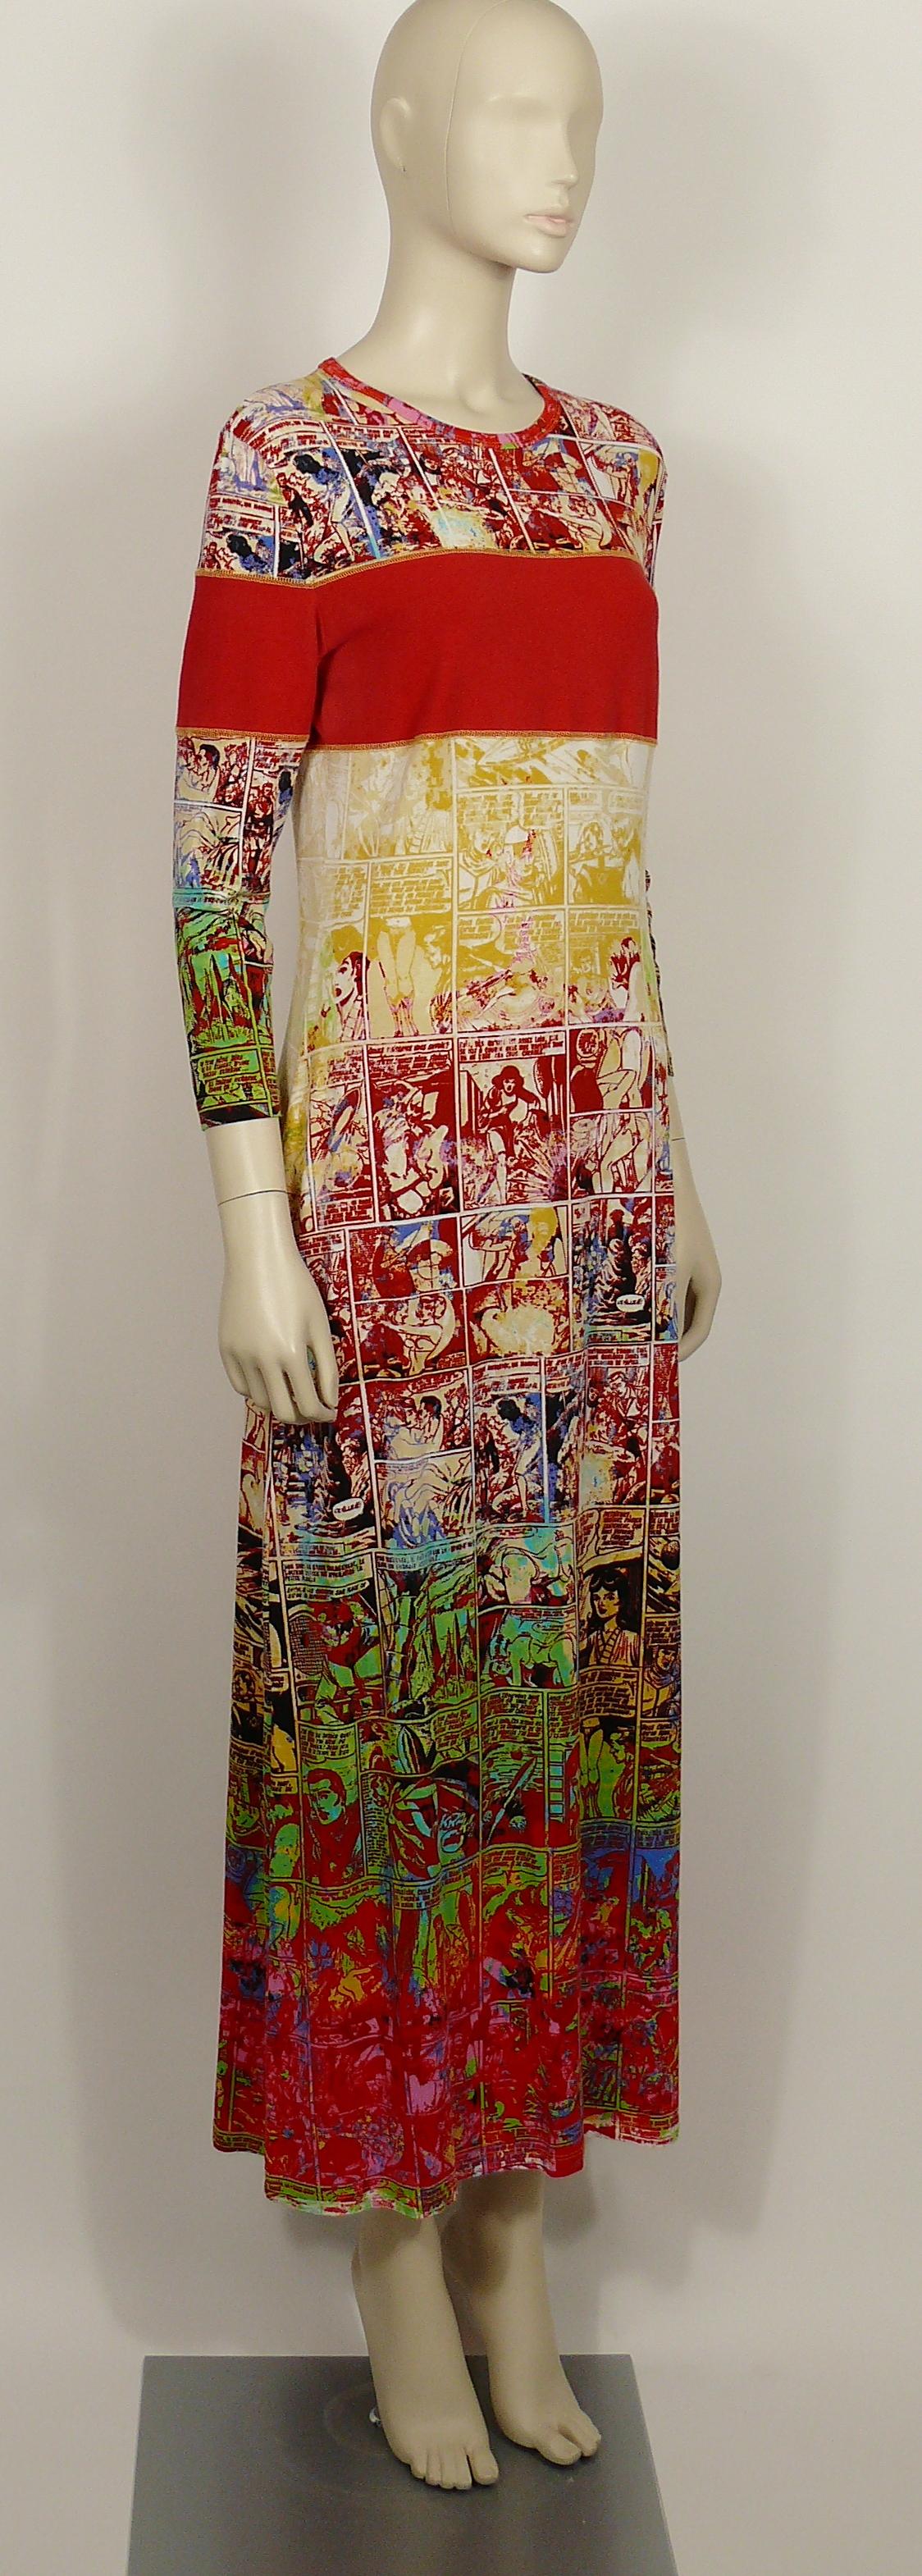 JEAN PAUL GAULTIER vintage multicolored erotic comic cartoon print maxi dress featuring a red fabric panel across the chest.

Slips on.

Label reads JPG JEAN'S.
Made in Italy.
Collection N°0005.

Size tag reads : L.
Please refer to